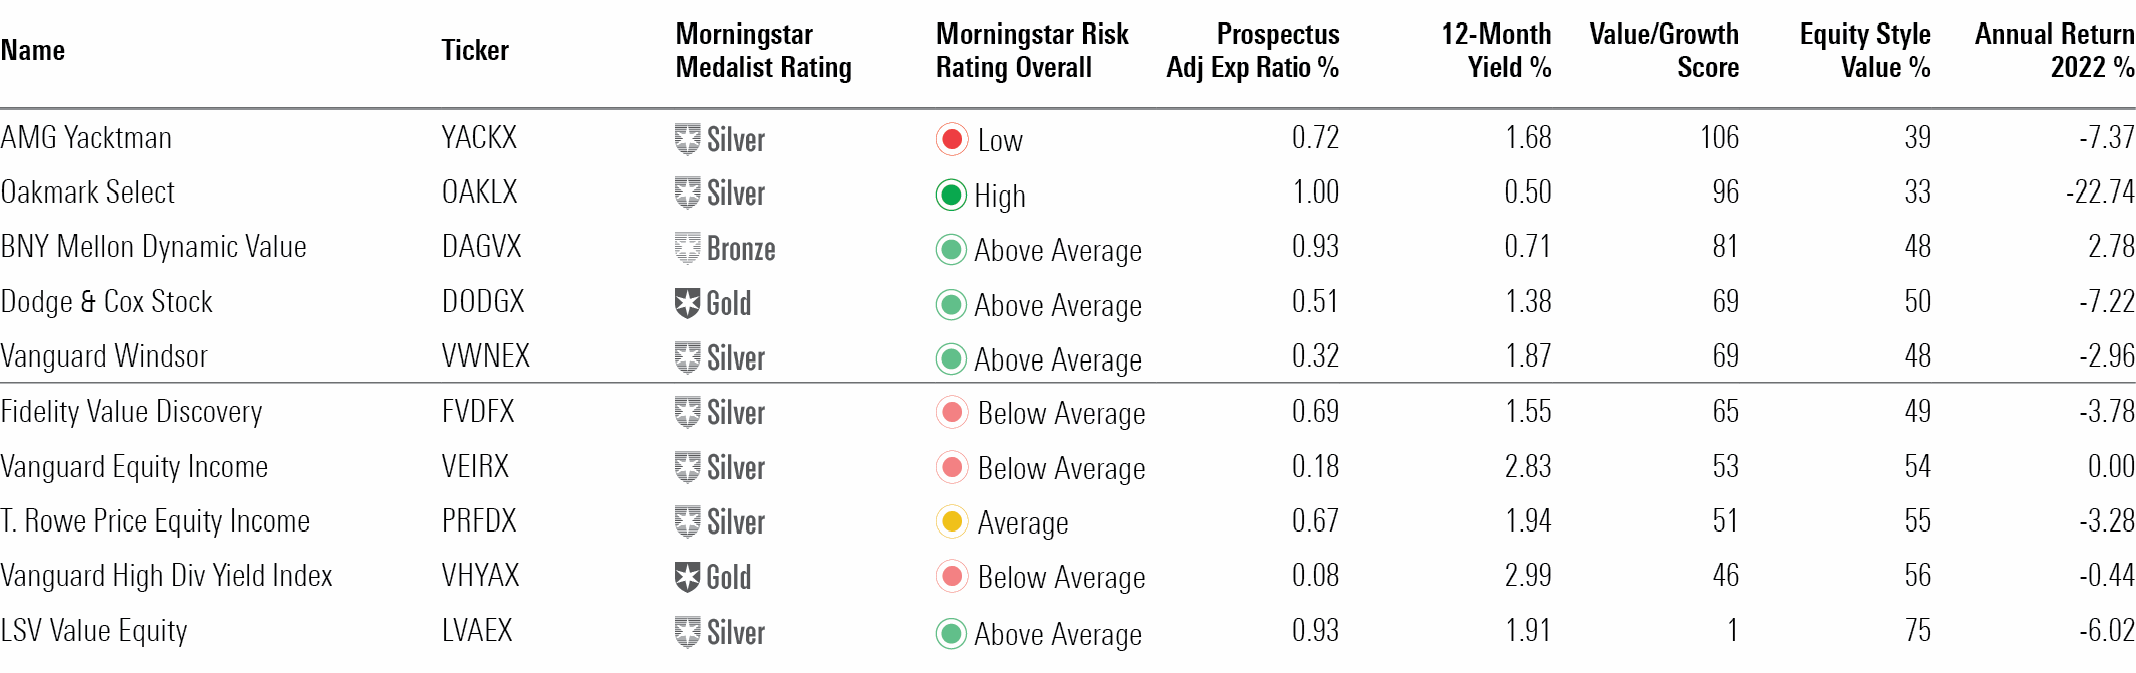 A table of the key measures for some of Morningstar's favorite large-value funds.